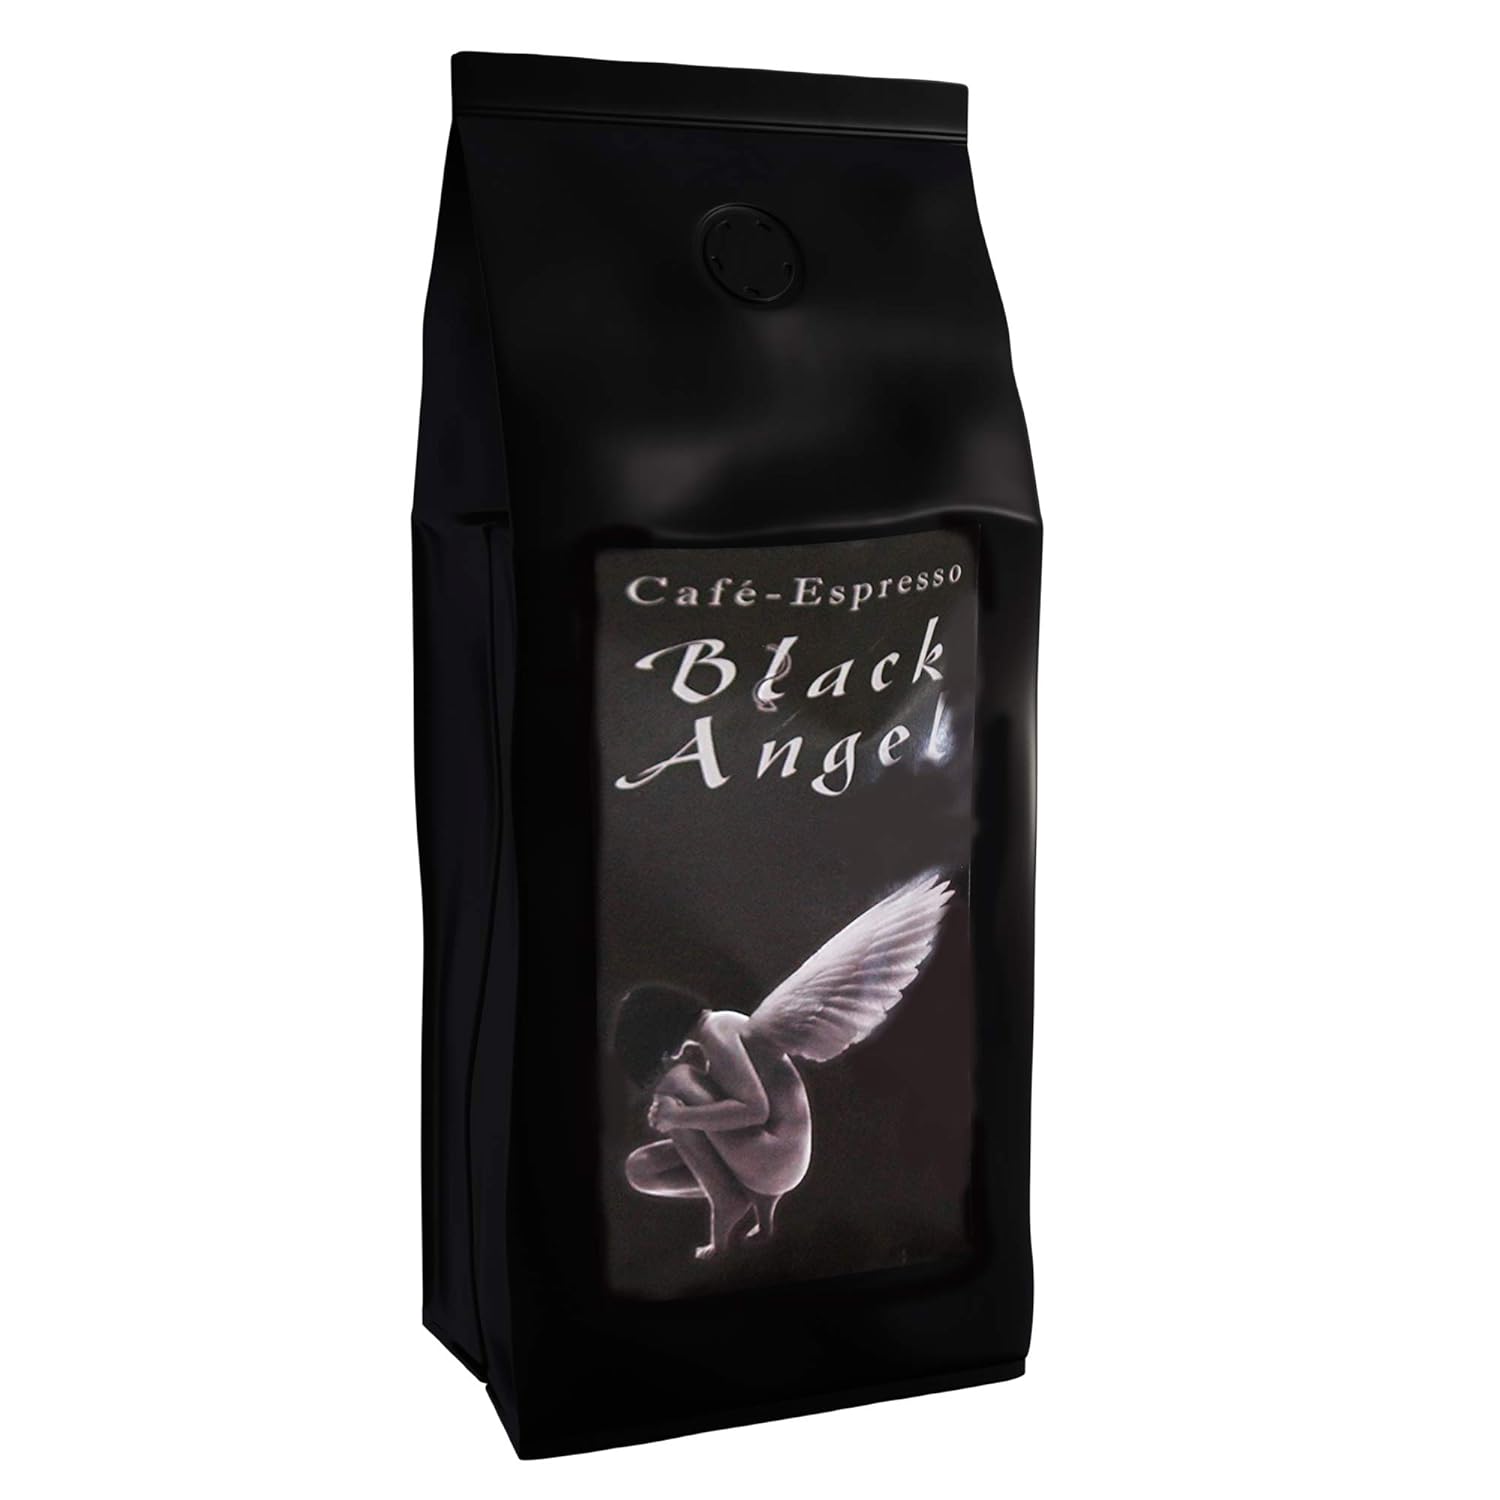 Espresso Coffee Beans \"Black Angel\" Coffee Beans - Strongly Roasted (Whole Beans, 500 g) - Top Coffee - Low Acid - Freshly Roasted, Gift Set - Countries Coffee from Around the World